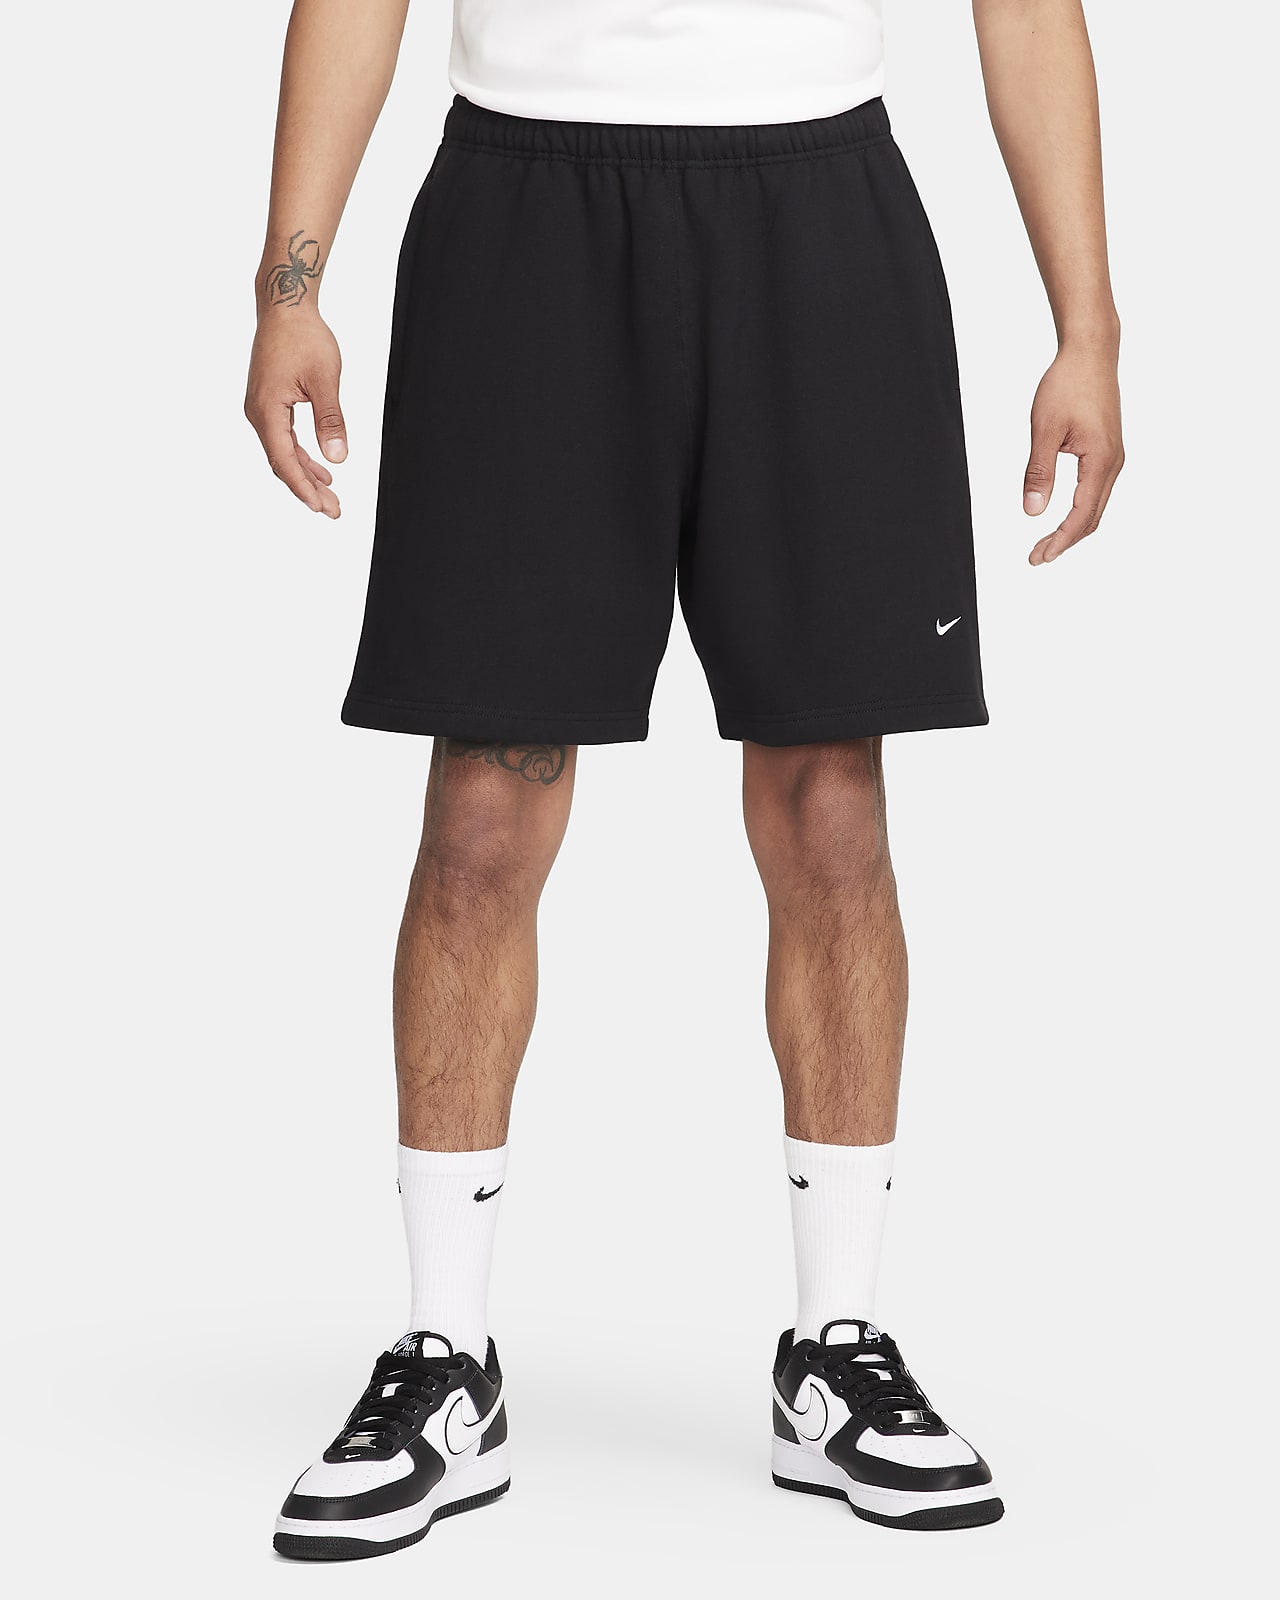 Solo Swoosh Collection Member Early Access: Sign in & use code